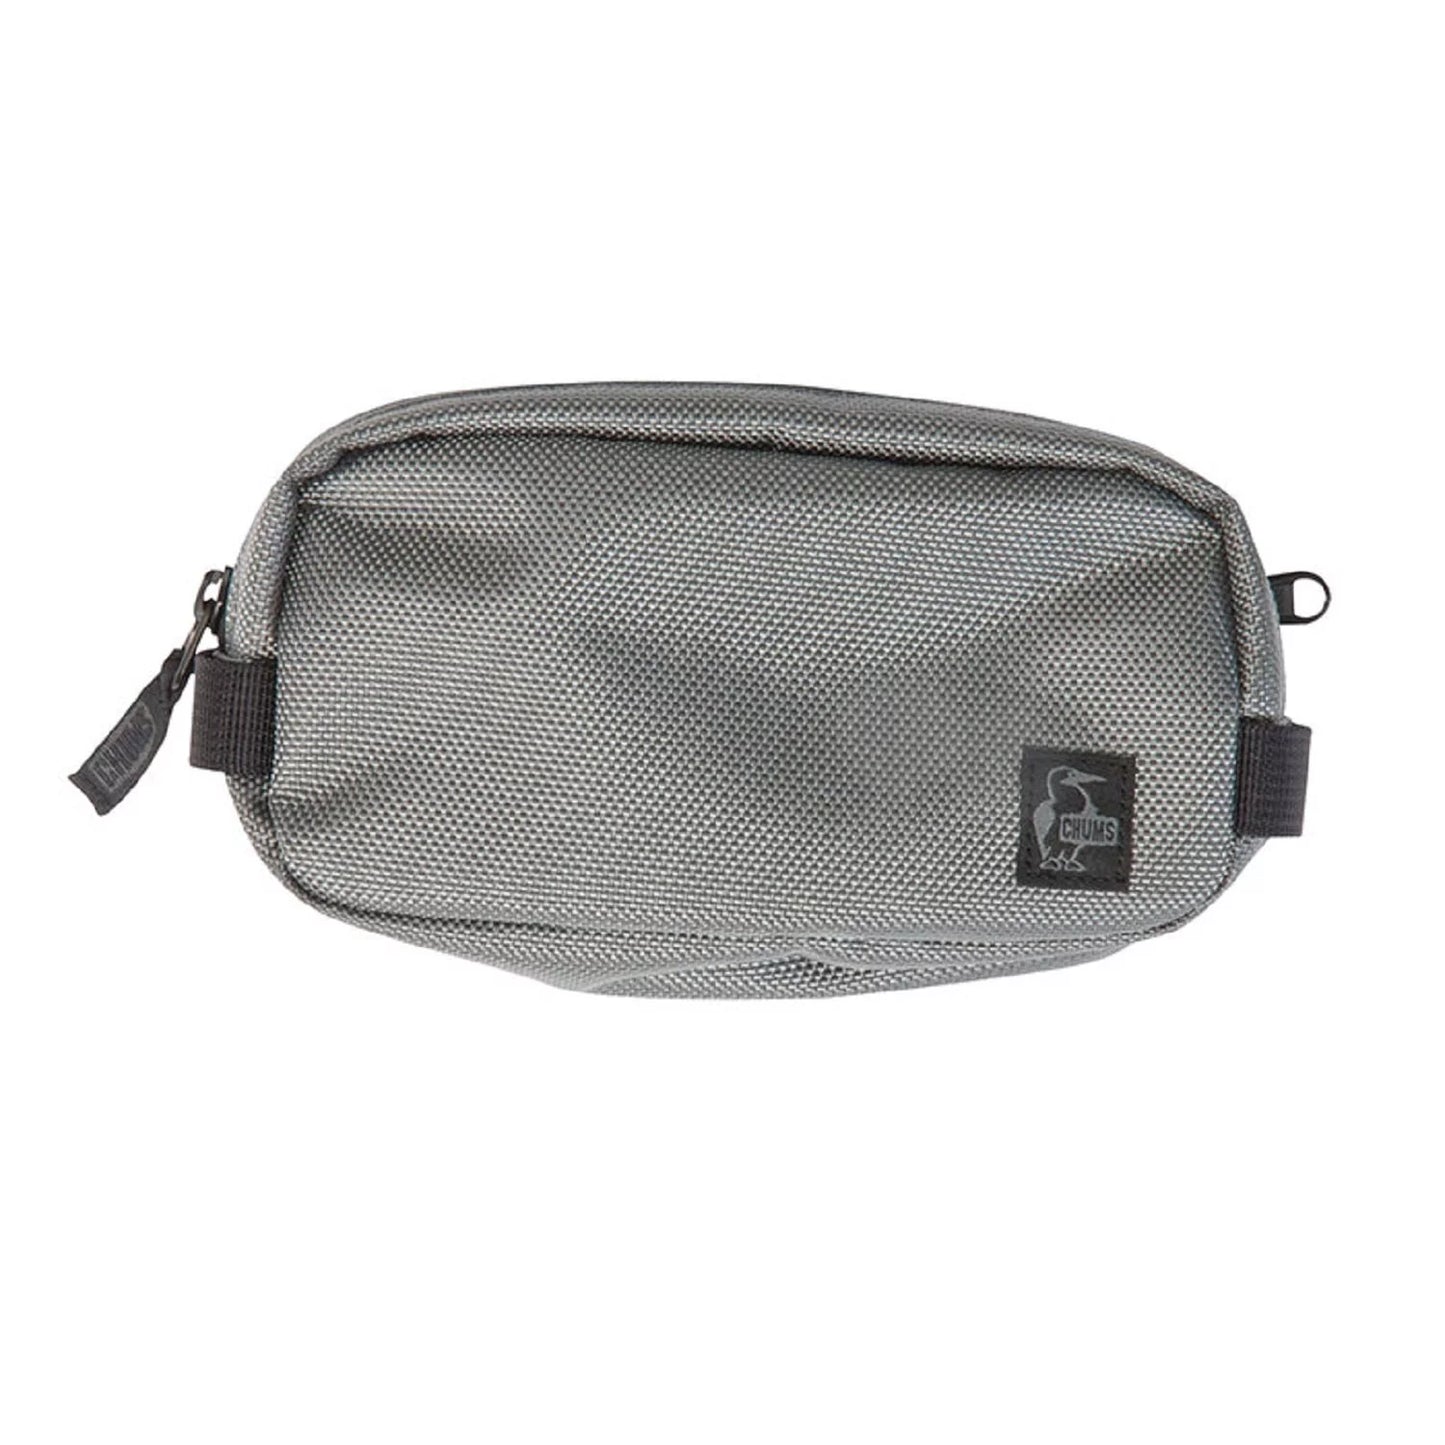 Chums Latitude 7 Bag Charcoal Front View